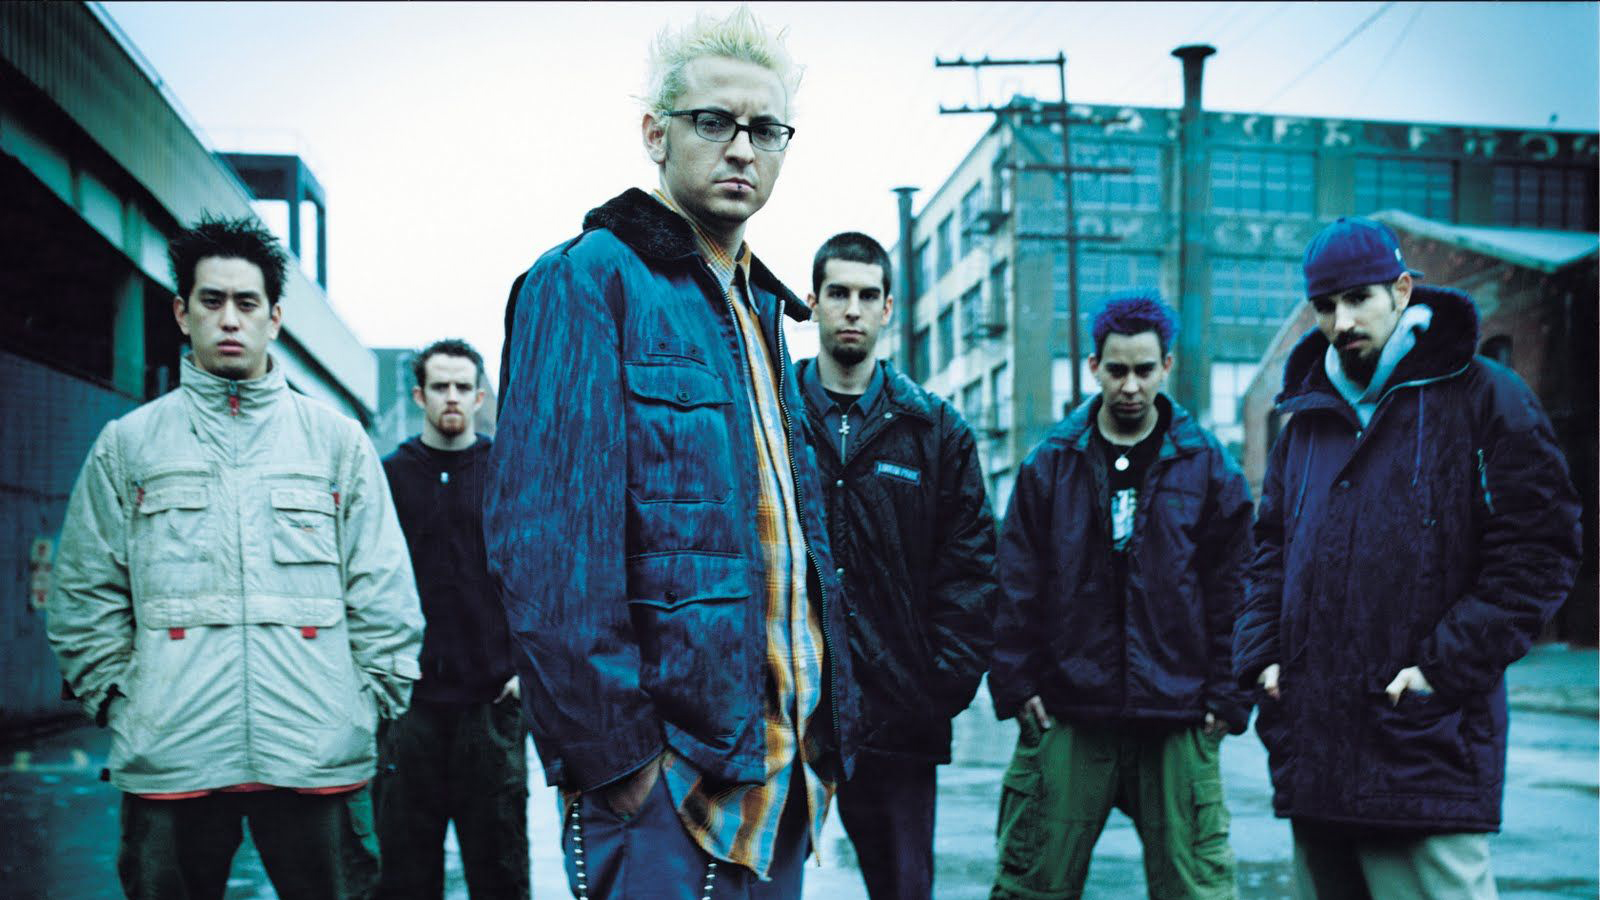 LINKIN PARK: Our label tried to change the DNA of our band